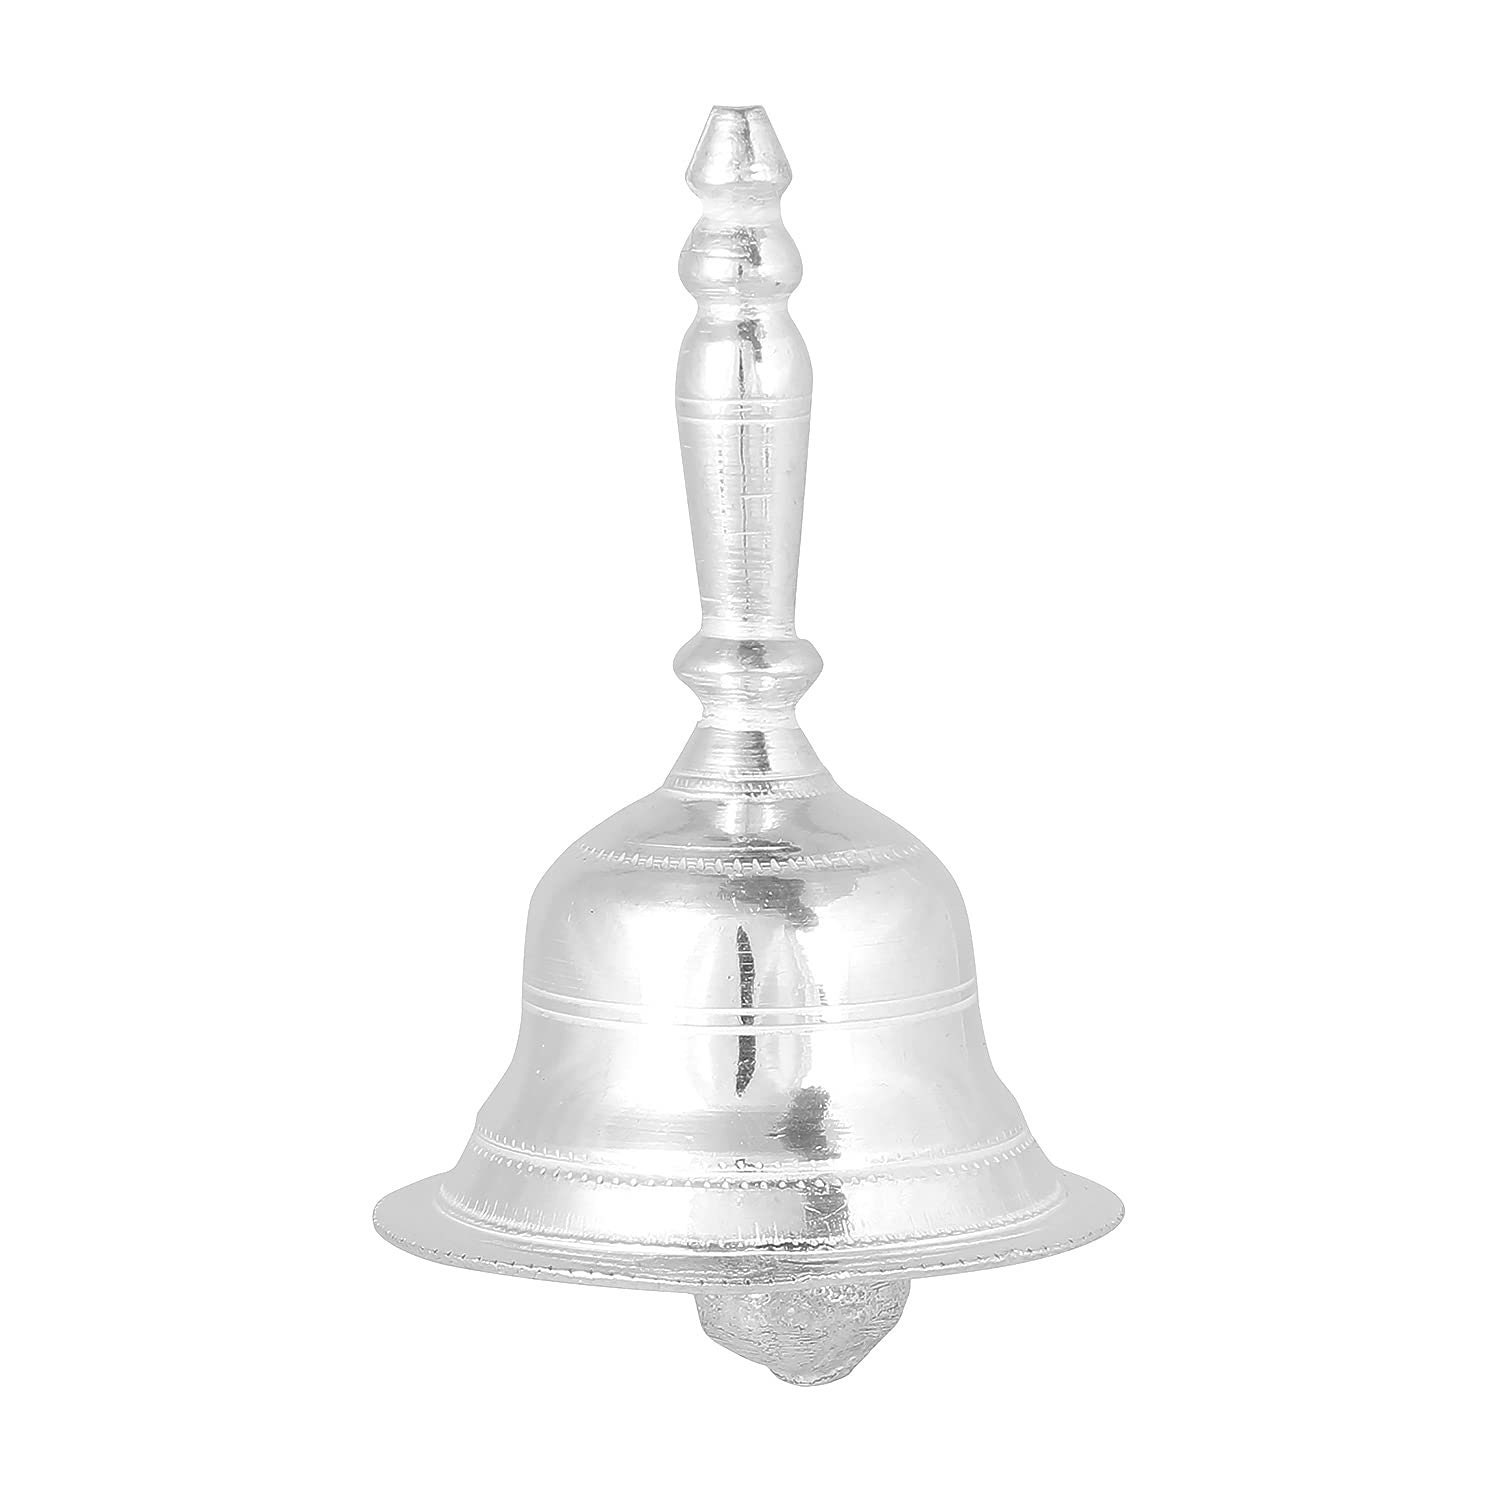 Silver Bell for Pooja - Ghanti - 3.1 inches Height - Medium Size - 1-S92 in  67.000 Grams